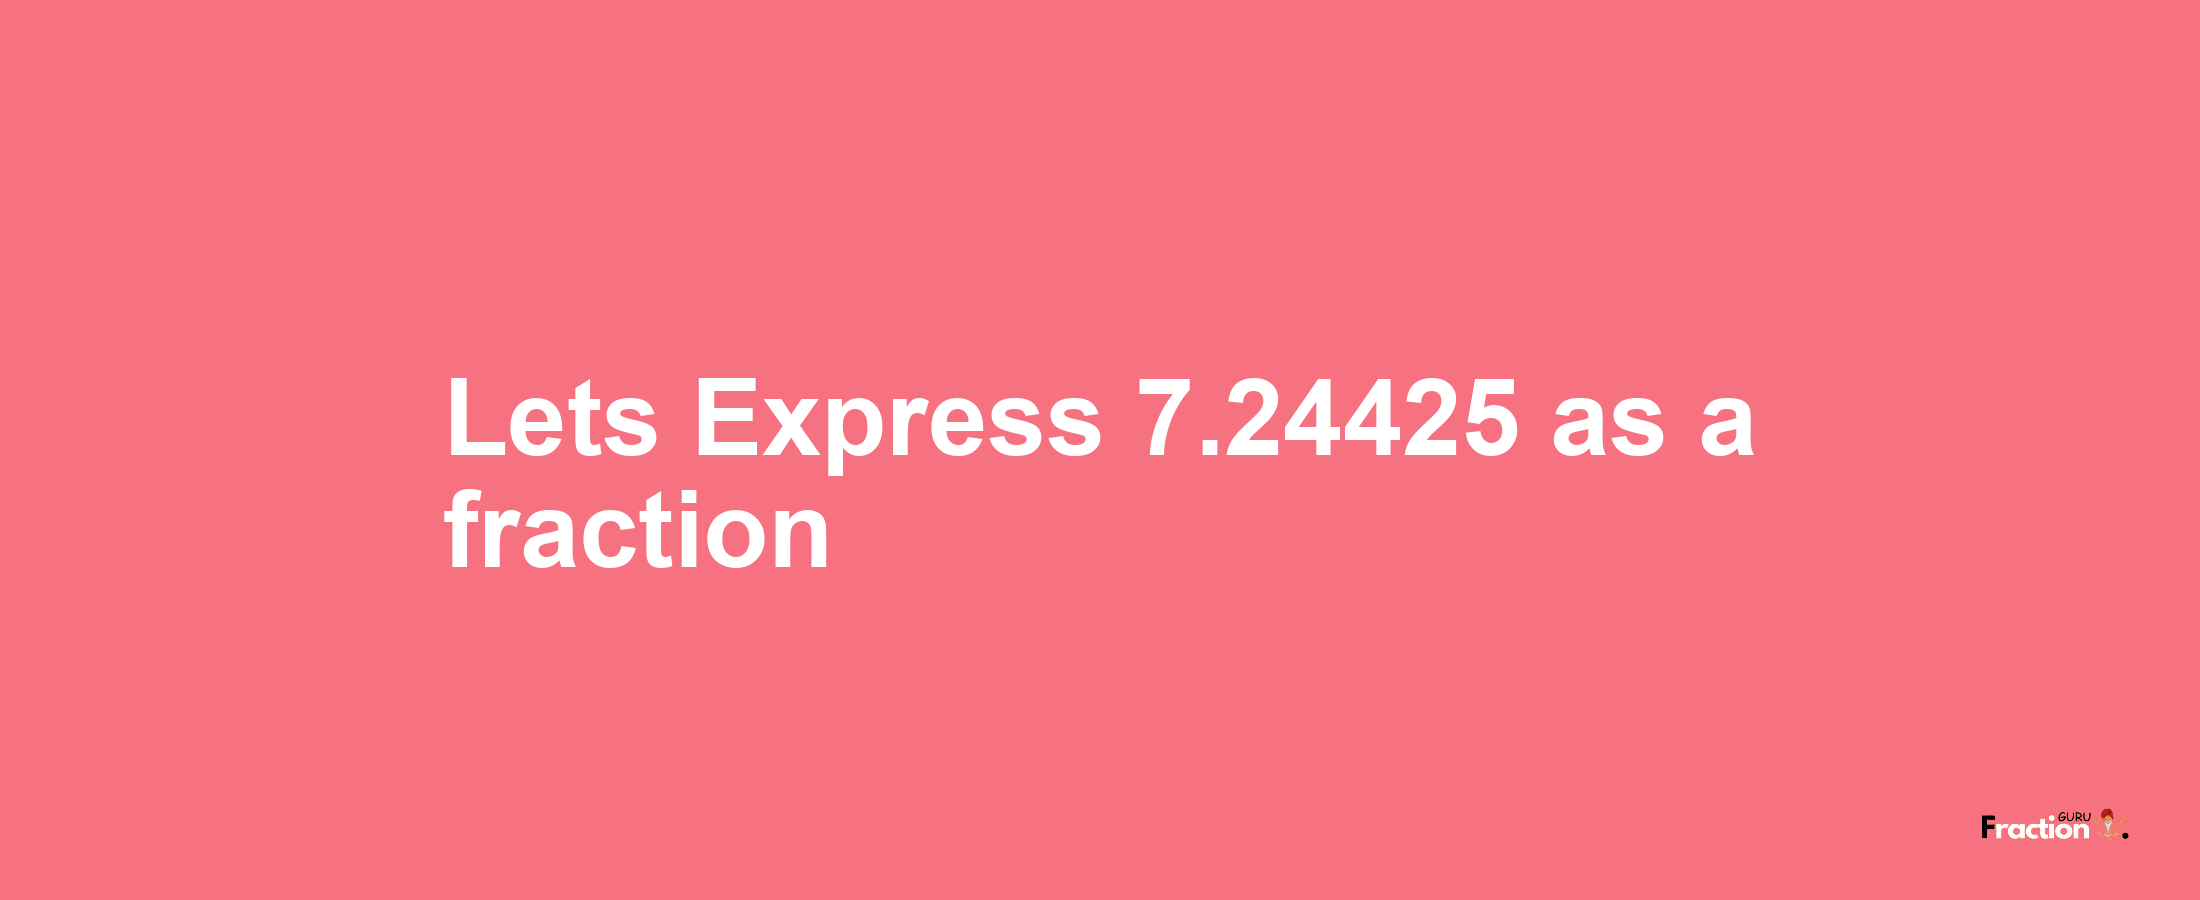 Lets Express 7.24425 as afraction